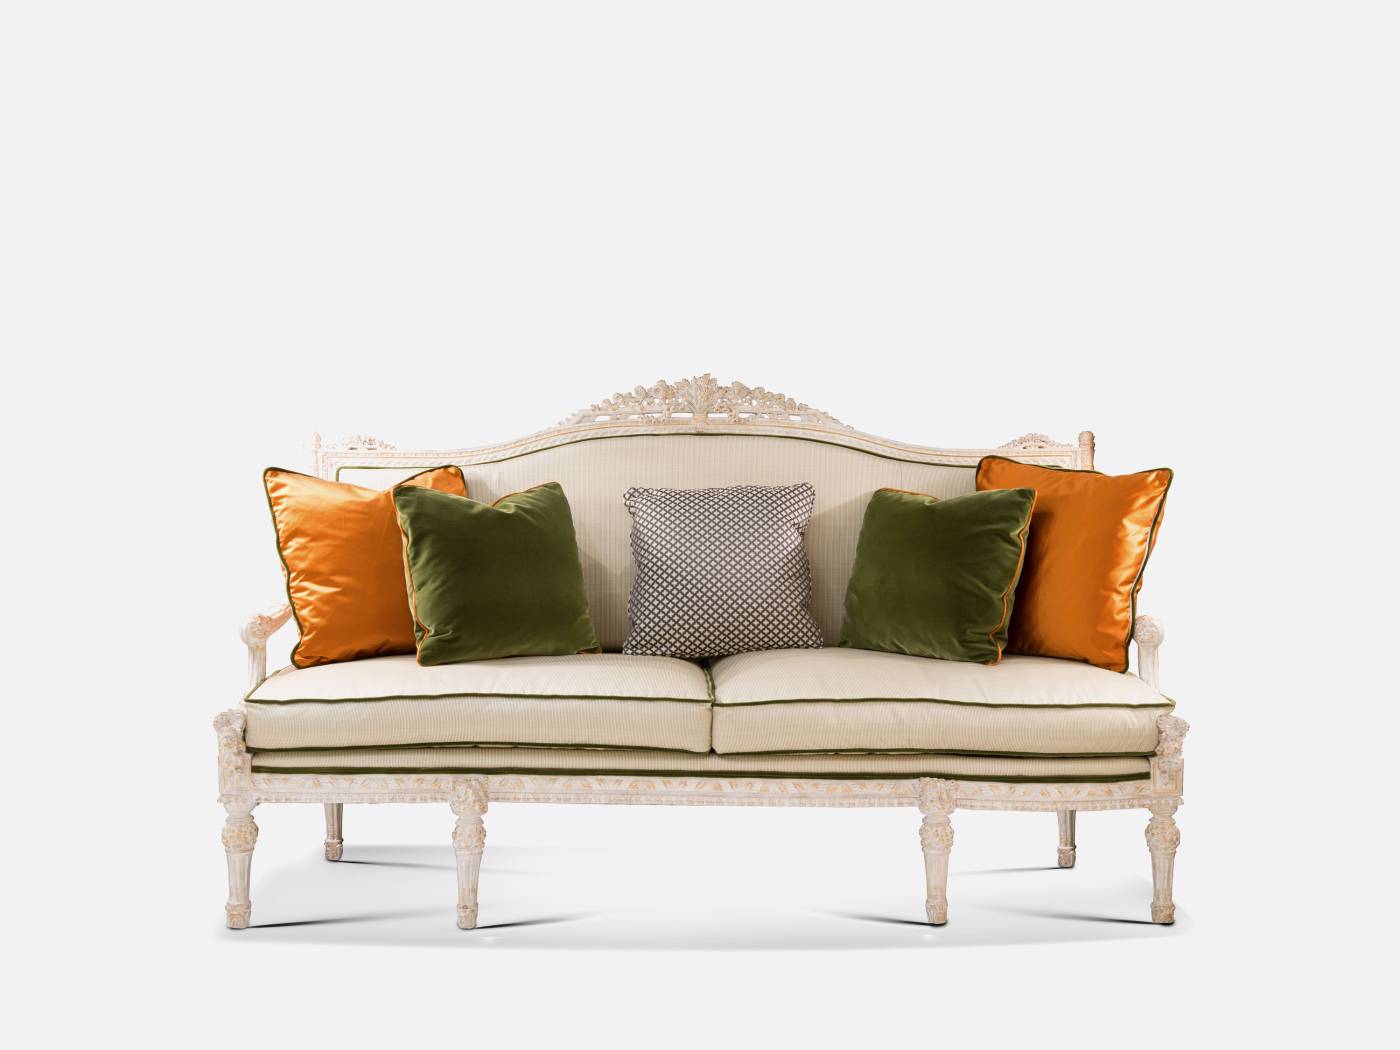 ART. 2226 - C.G. Capelletti quality furniture and timeless elegance with luxury made in italy contemporary Sofas.